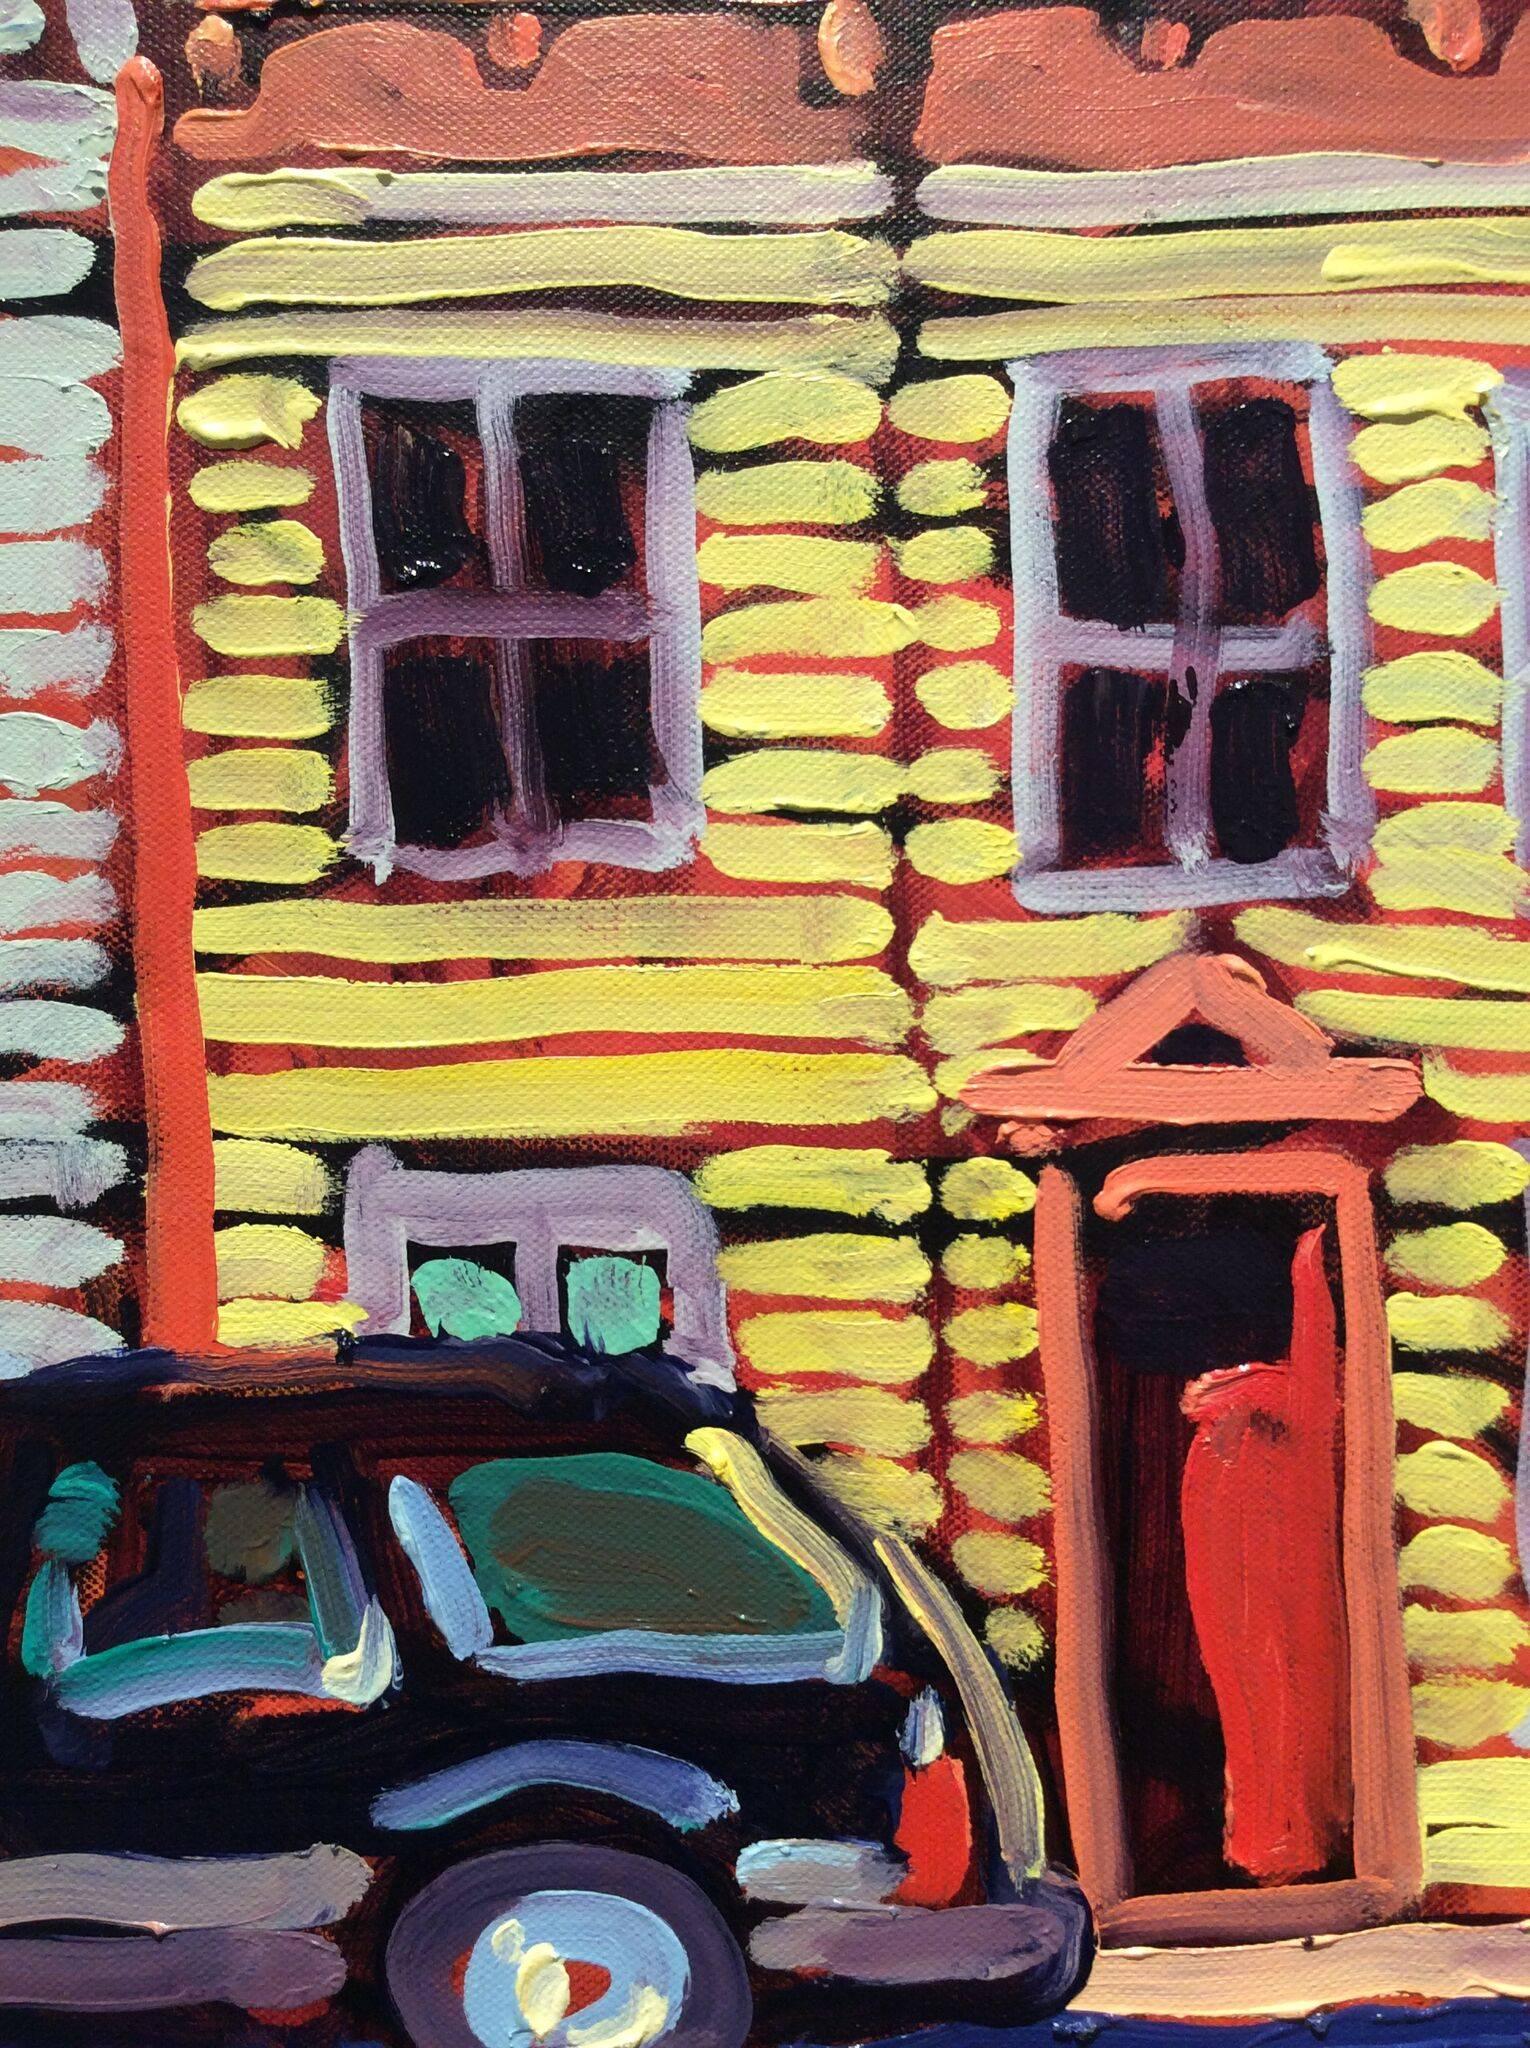 Parked, Yellow & Grey House (Small, Colorful Fauvist Style Cityscape Painting) 1